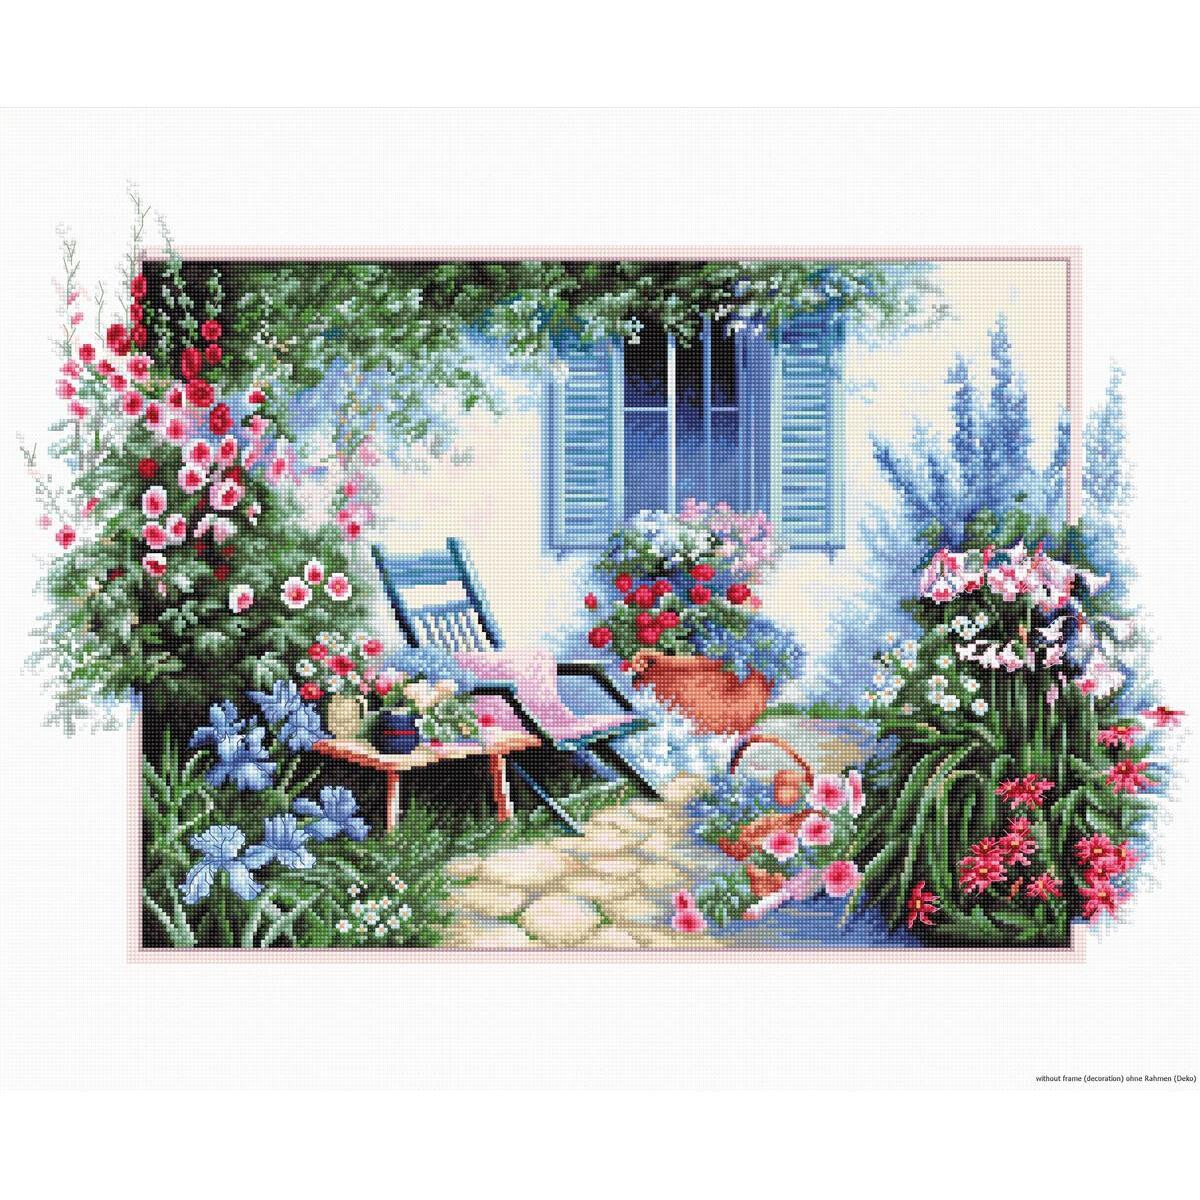 A tranquil garden scene with a blue wooden chair and a...